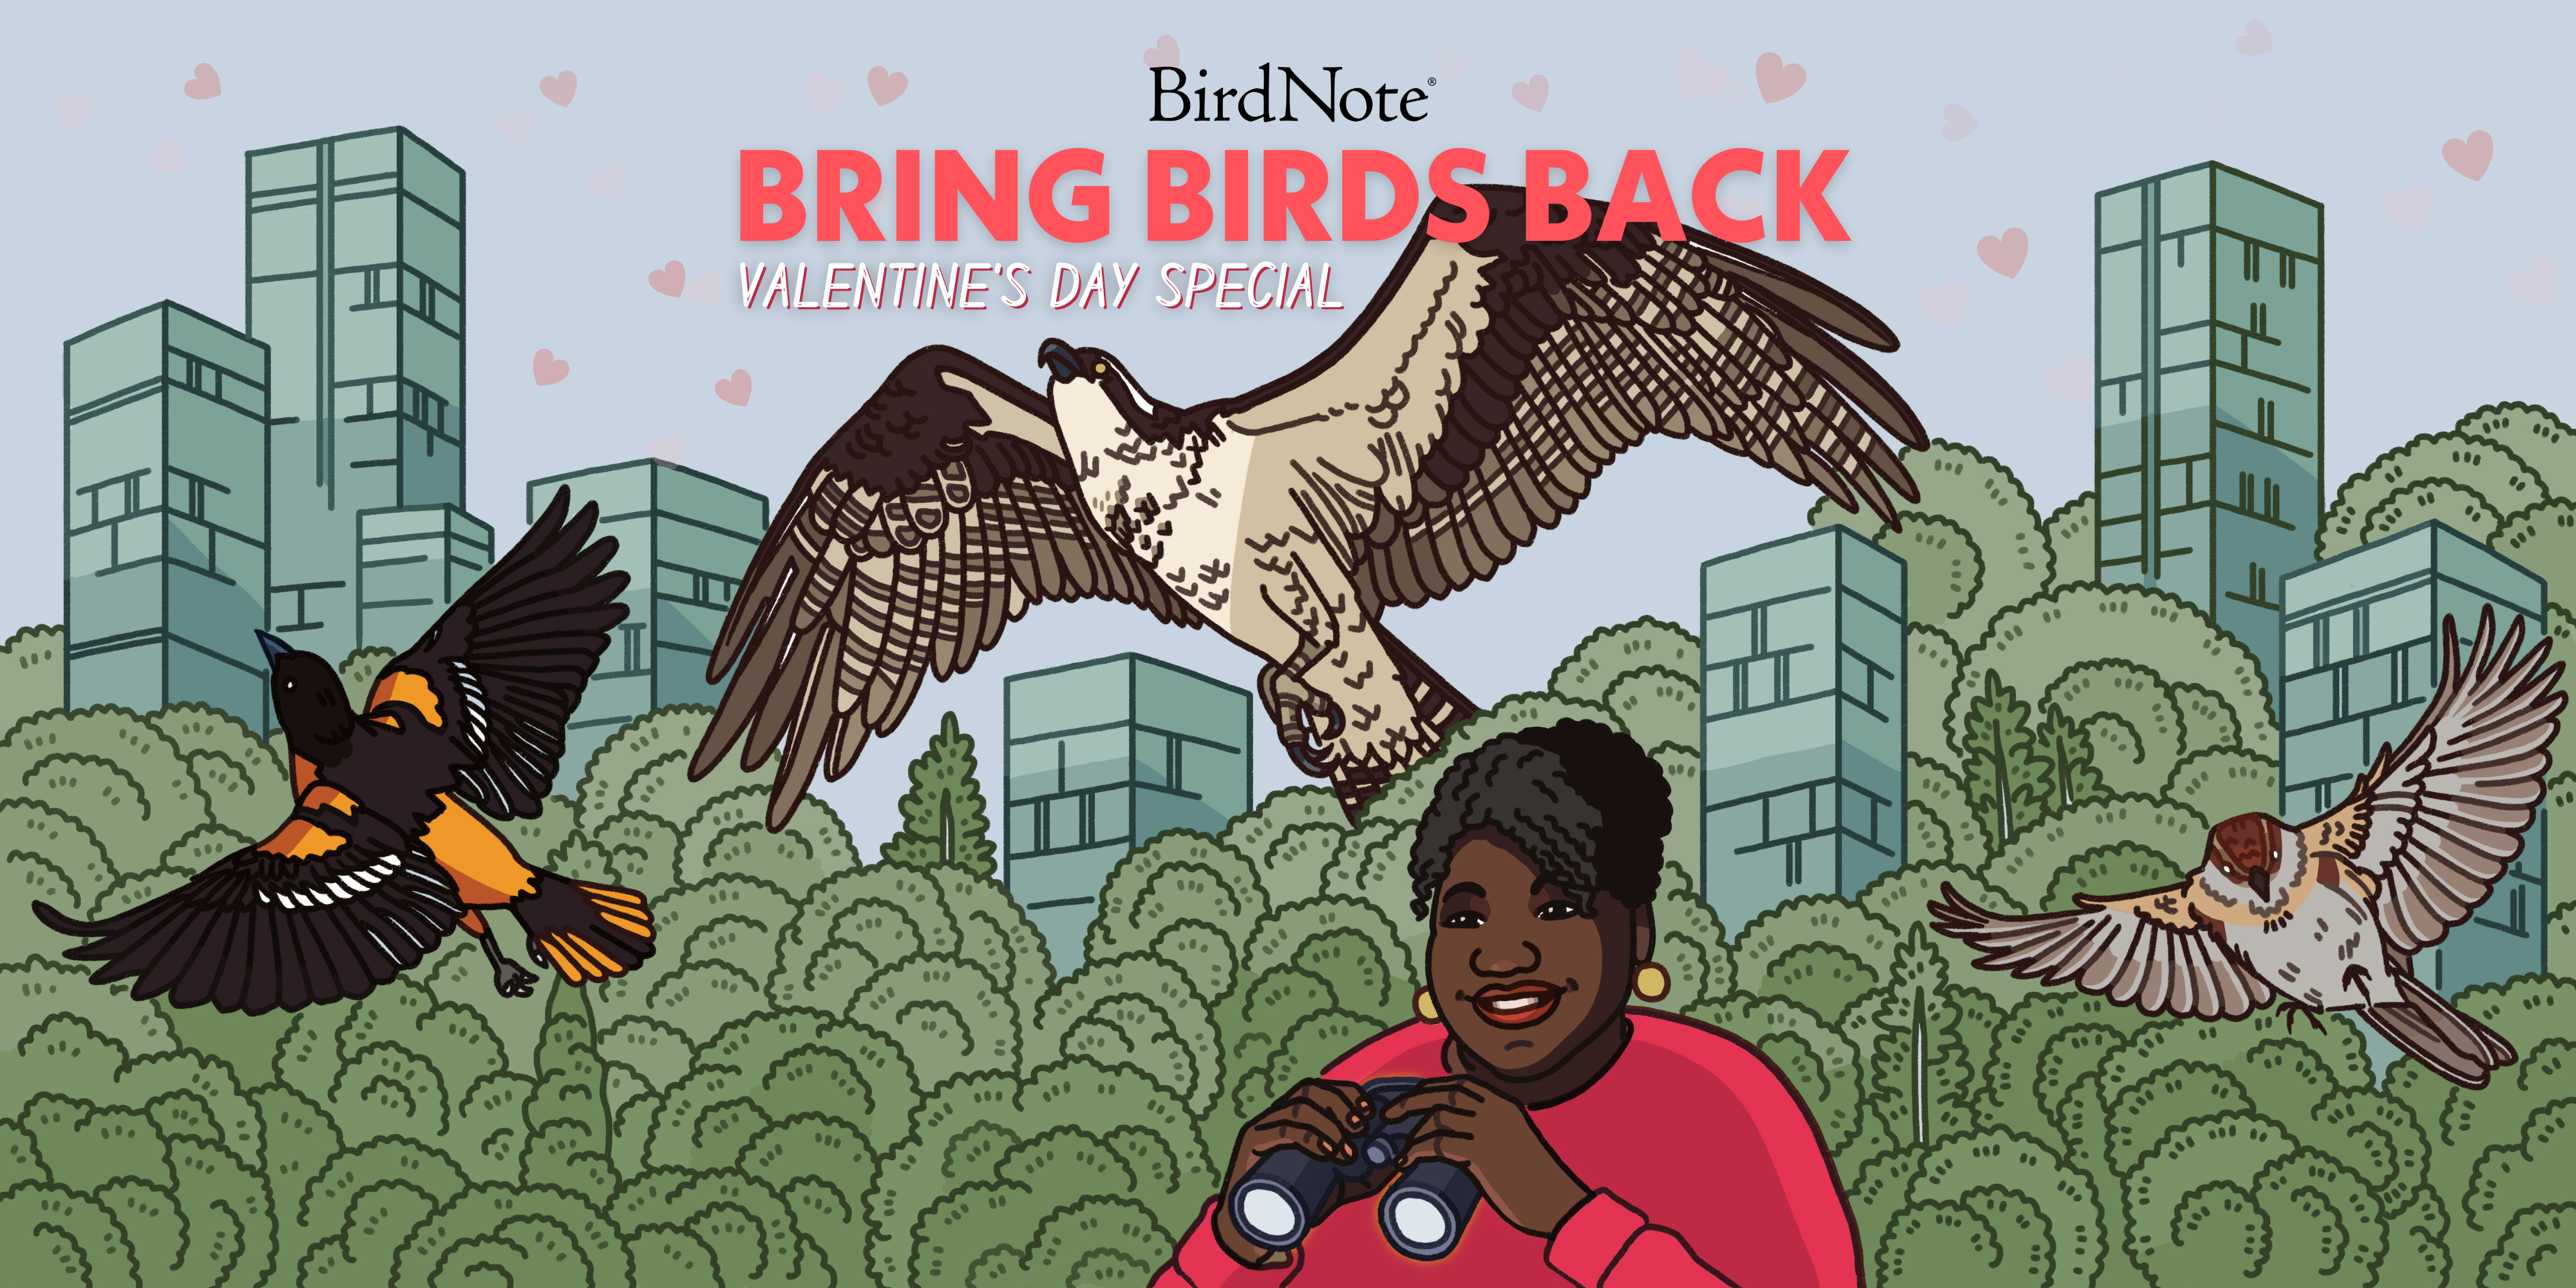 Bring Birds Back Cover Art with Bring Birds Back Text in Large Pink text and Tenijah Hamilton holding binoulars with a background of birds